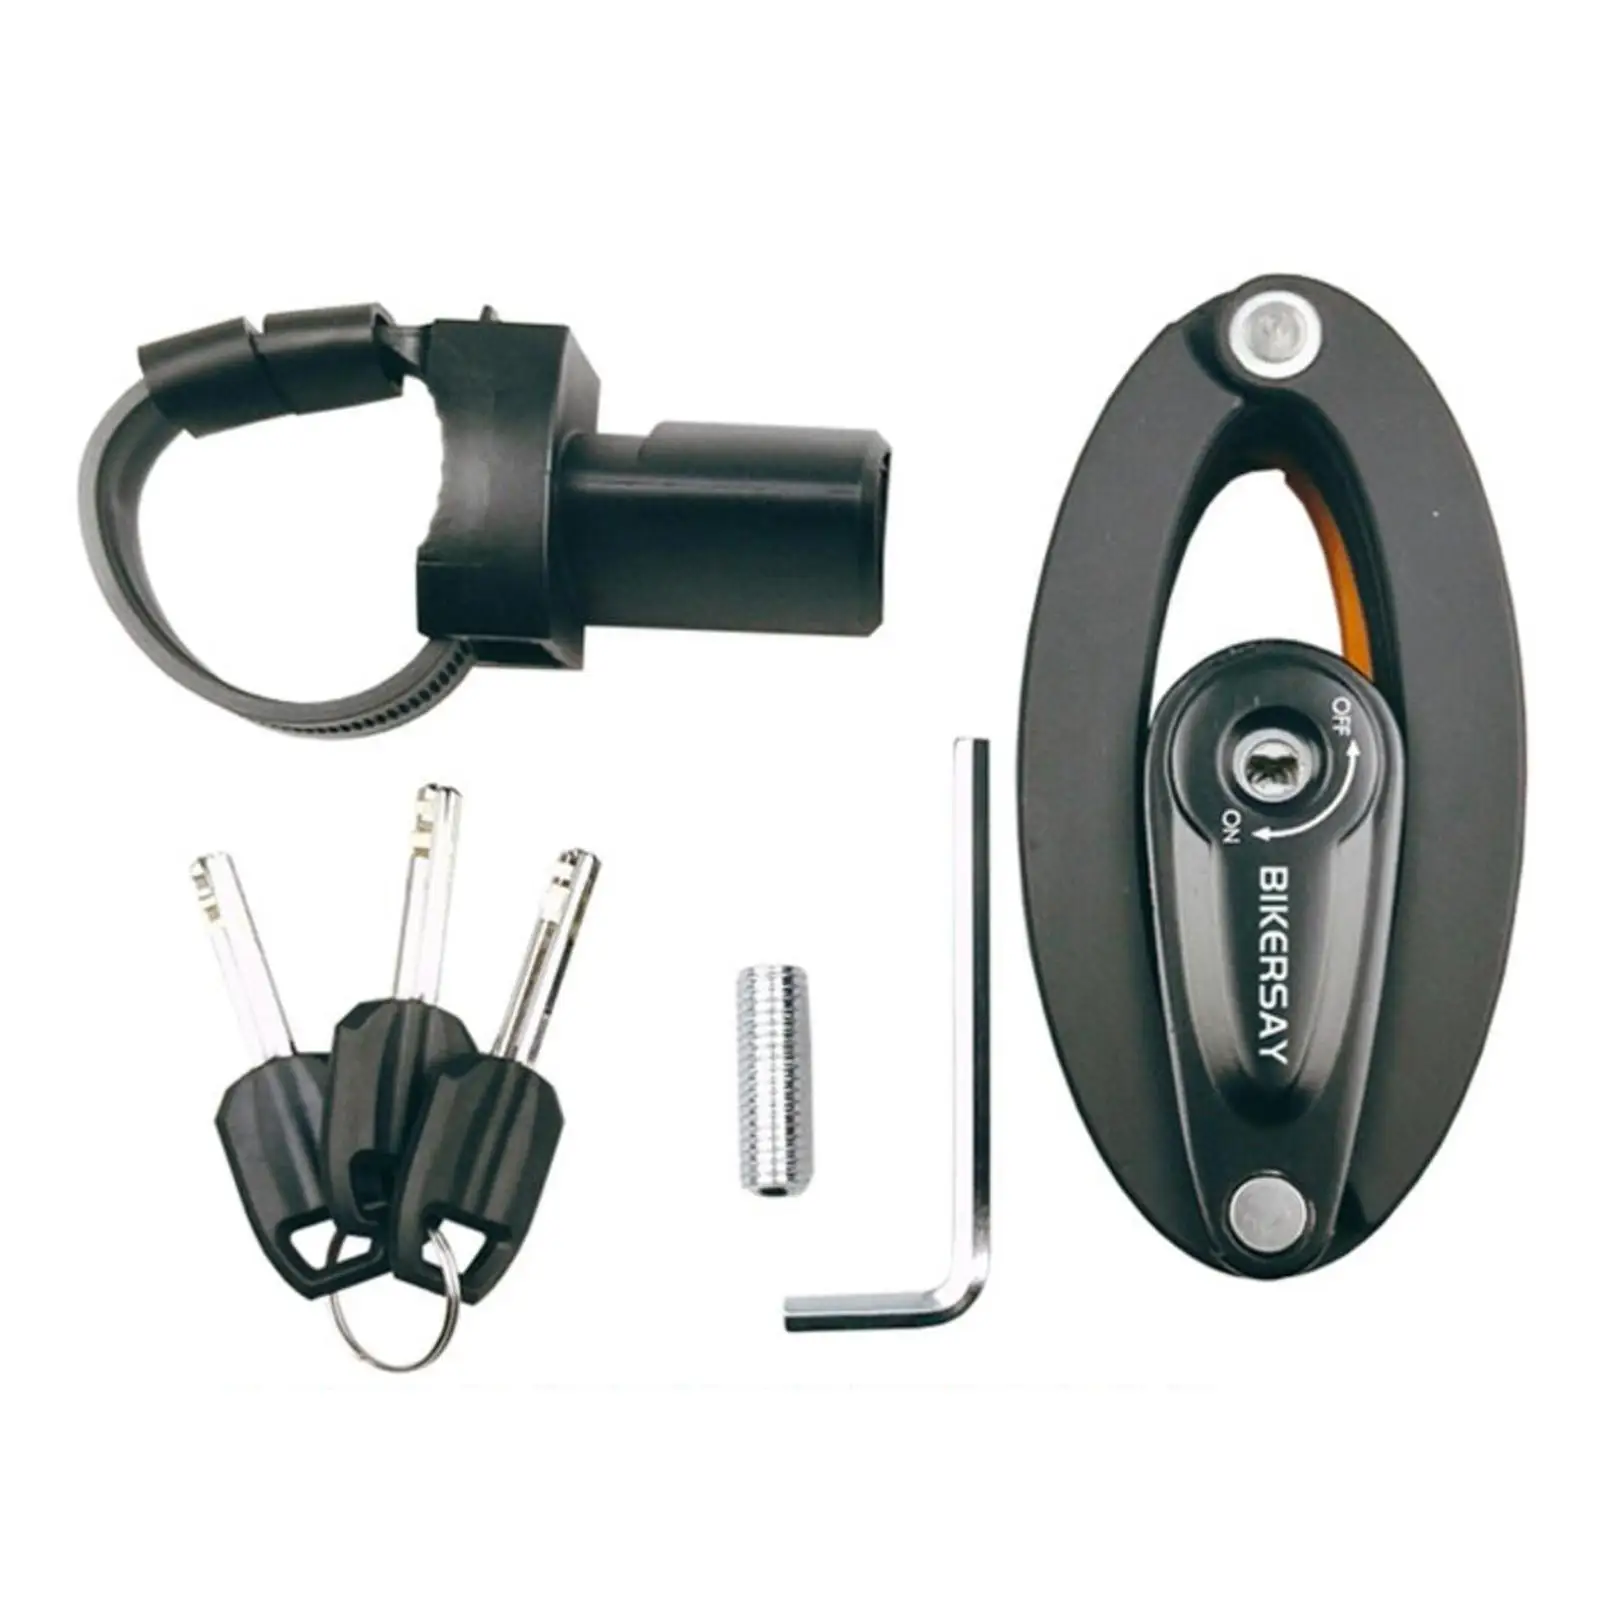 Folding Bike Lock, Compact Lock,   Lightweight   Accessory with Key Set for Bikes  and Scooters